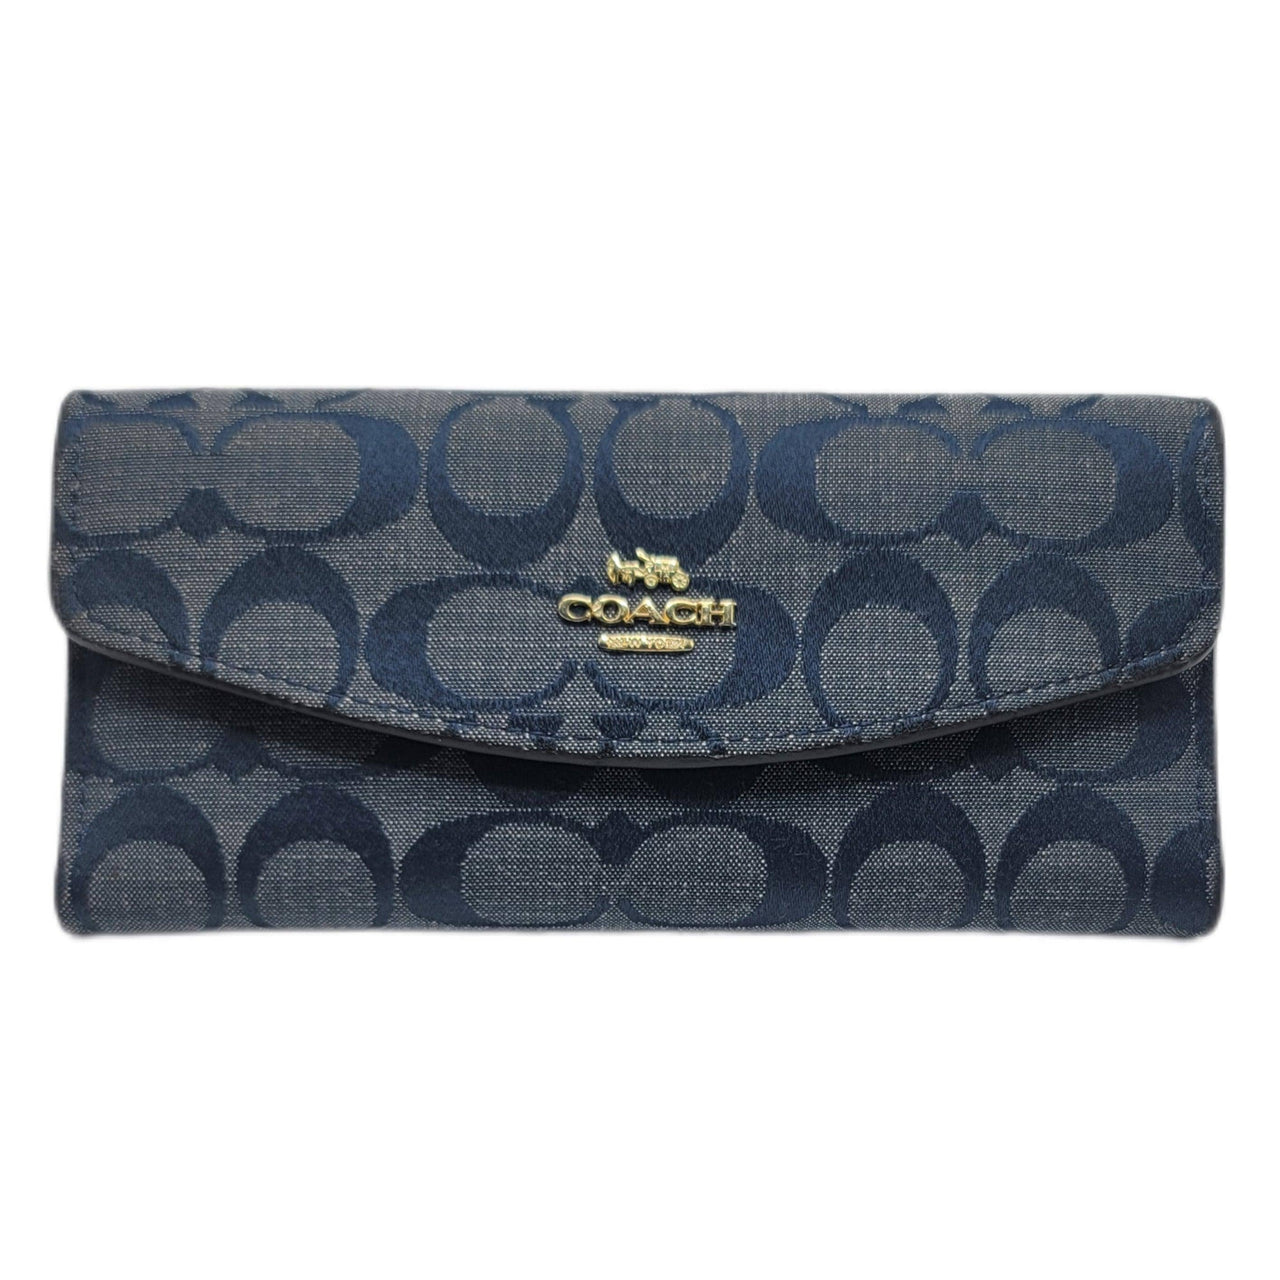 The Bag Couture Luggage & Bags Coach 3 Fold Wallet Classic Denim